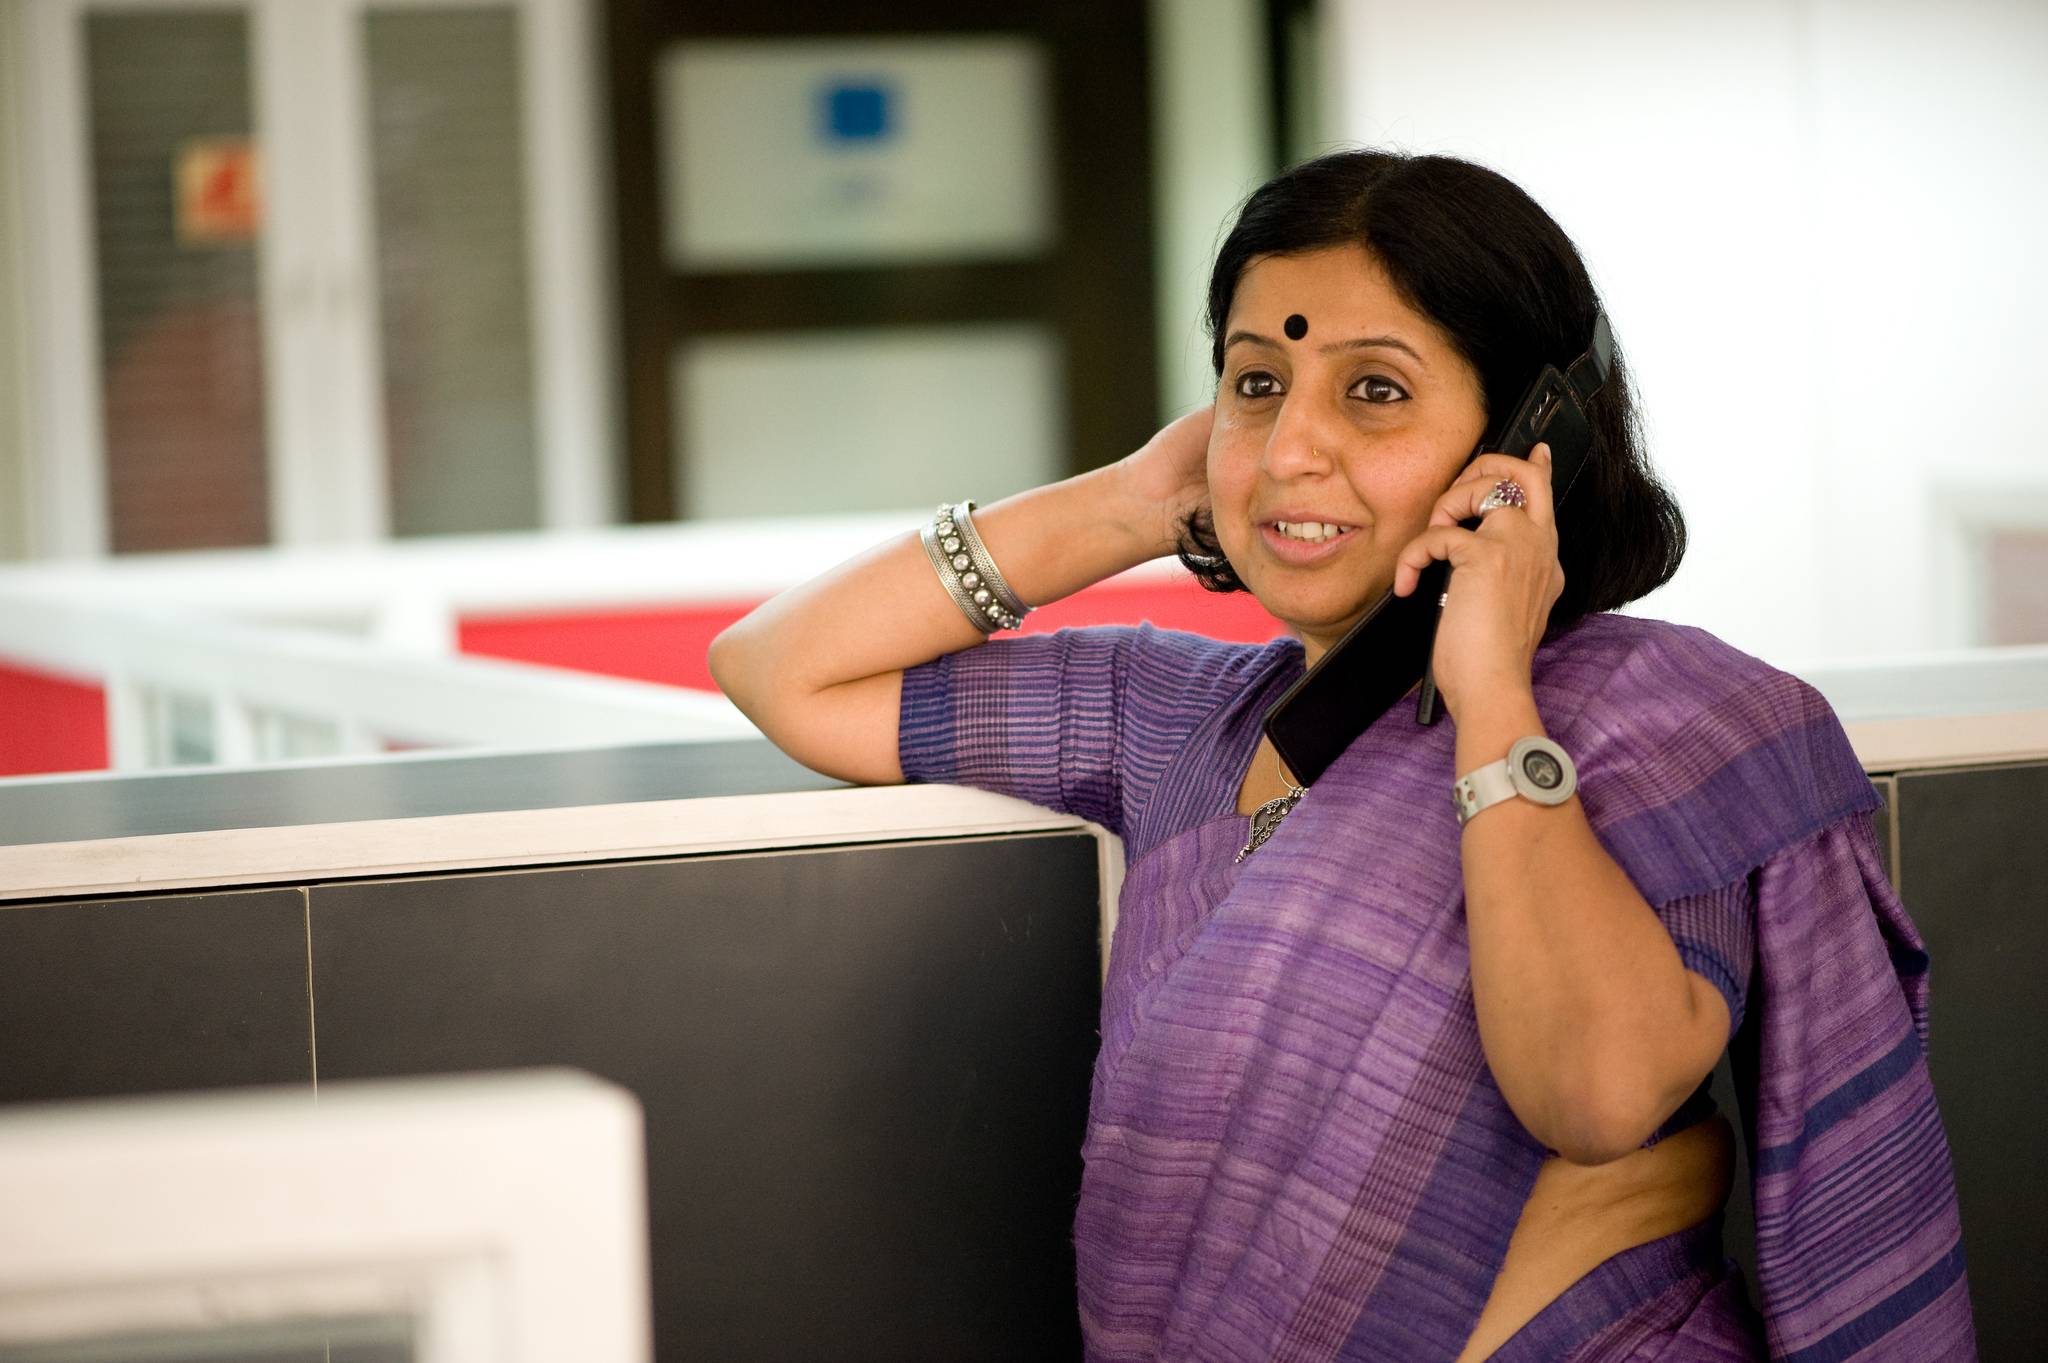 Indians are lacking a good work-life balance